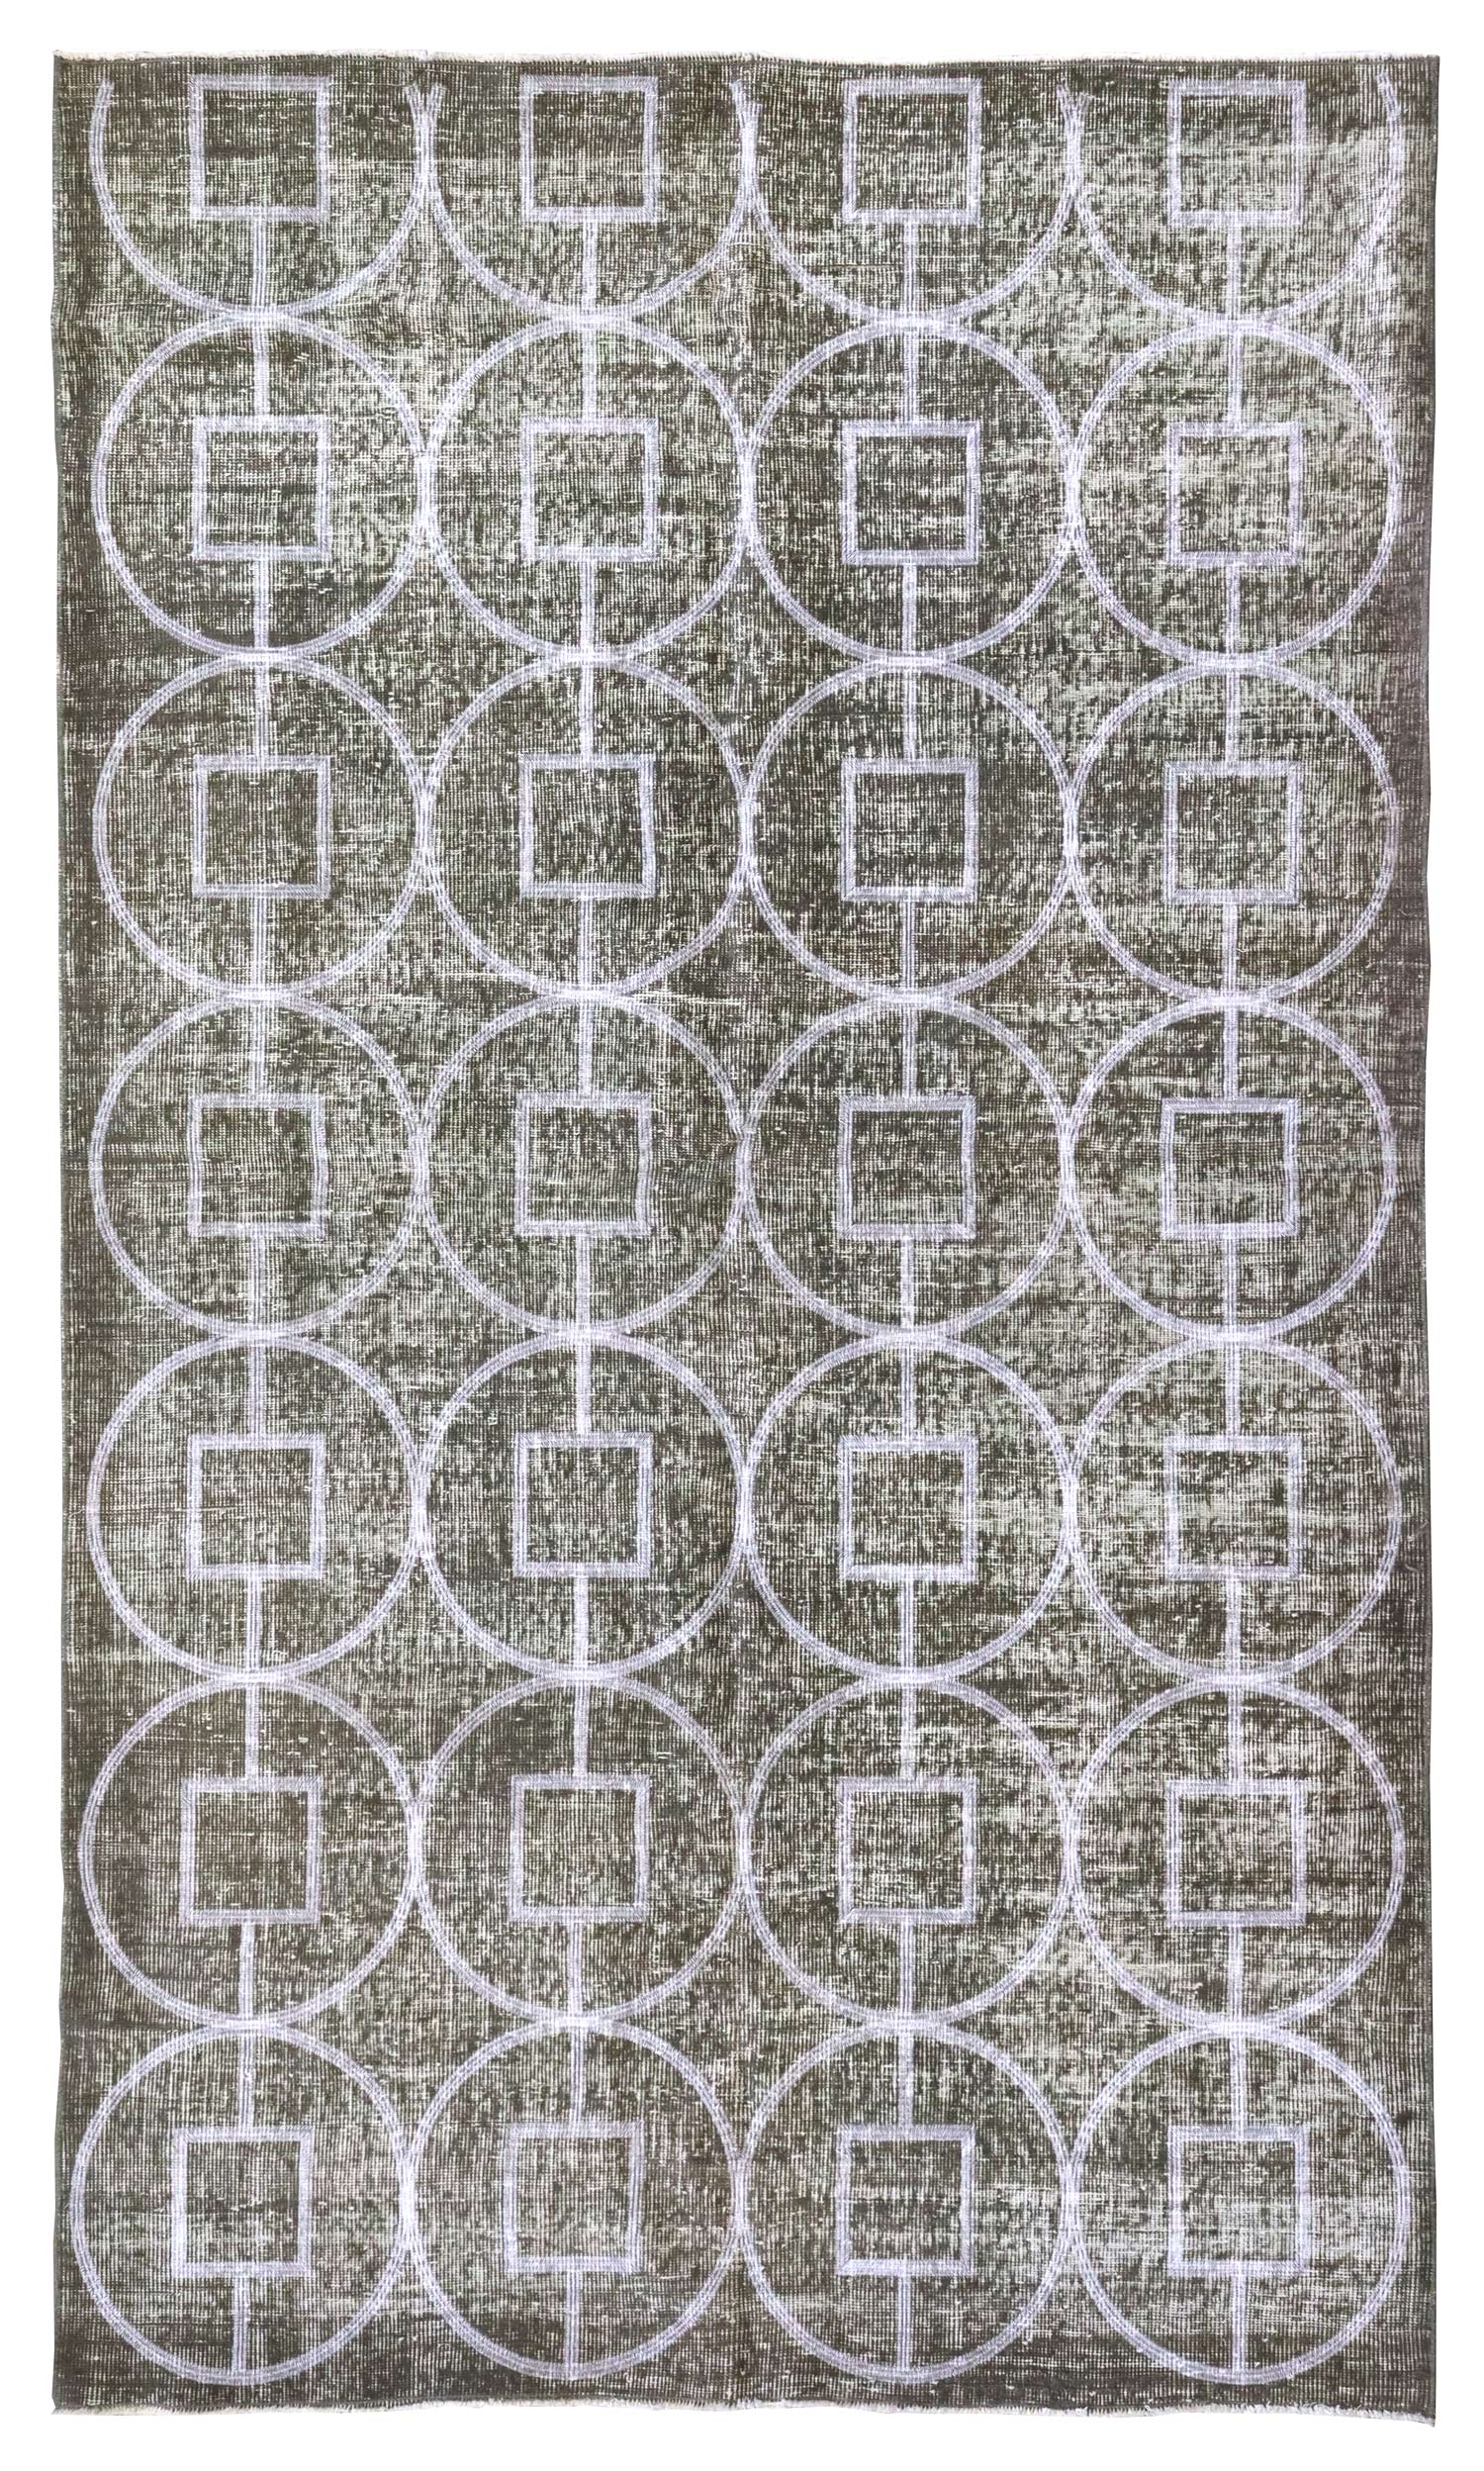 Vintage Embroidered OverdyeContemporary Rug